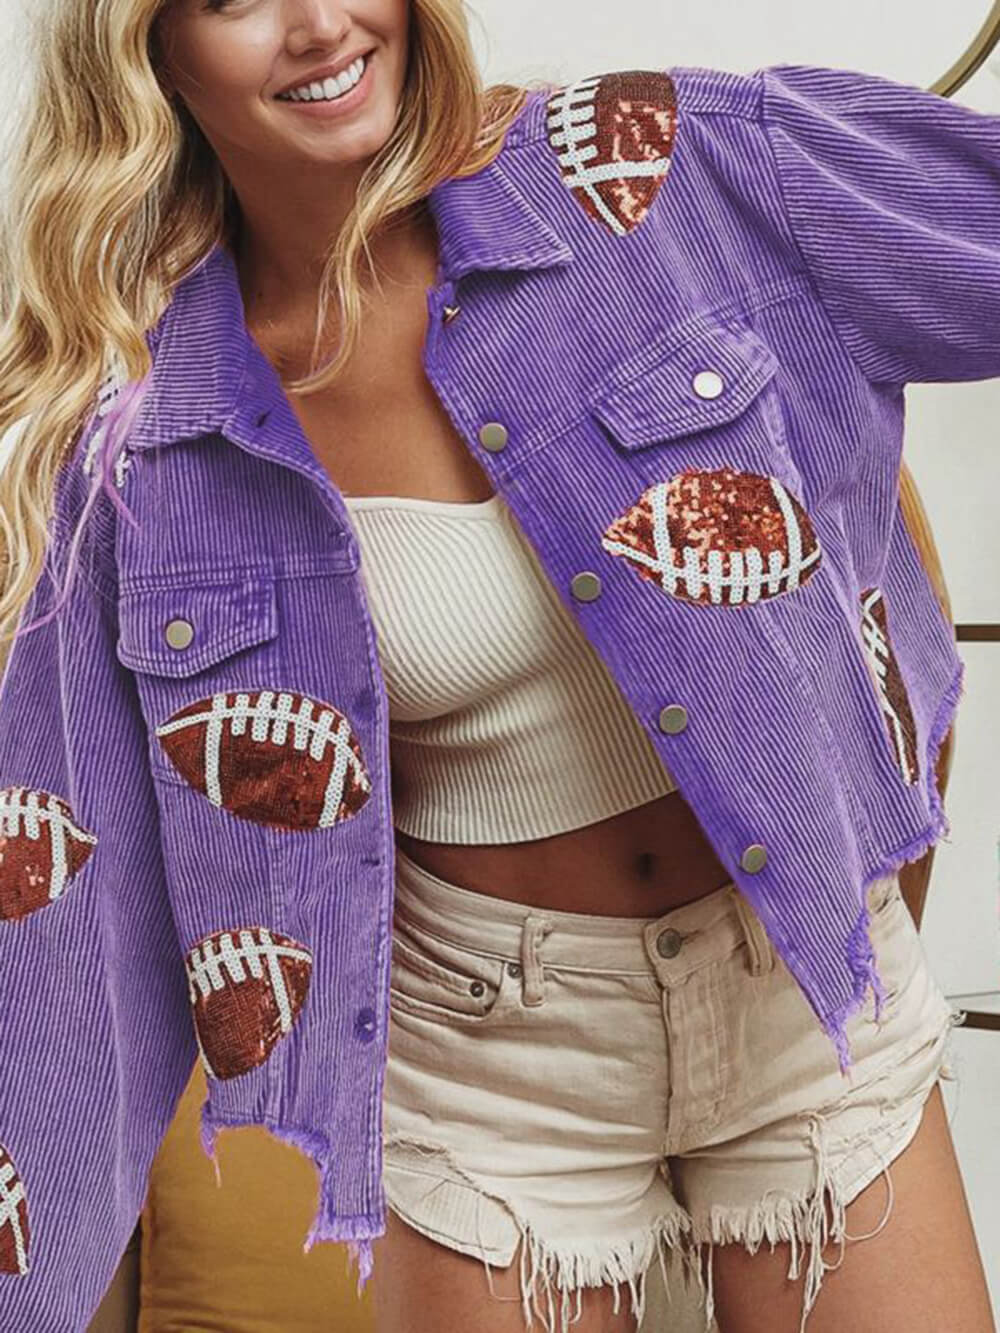 Veste simple boutonnage à sequins Game Day Rugby